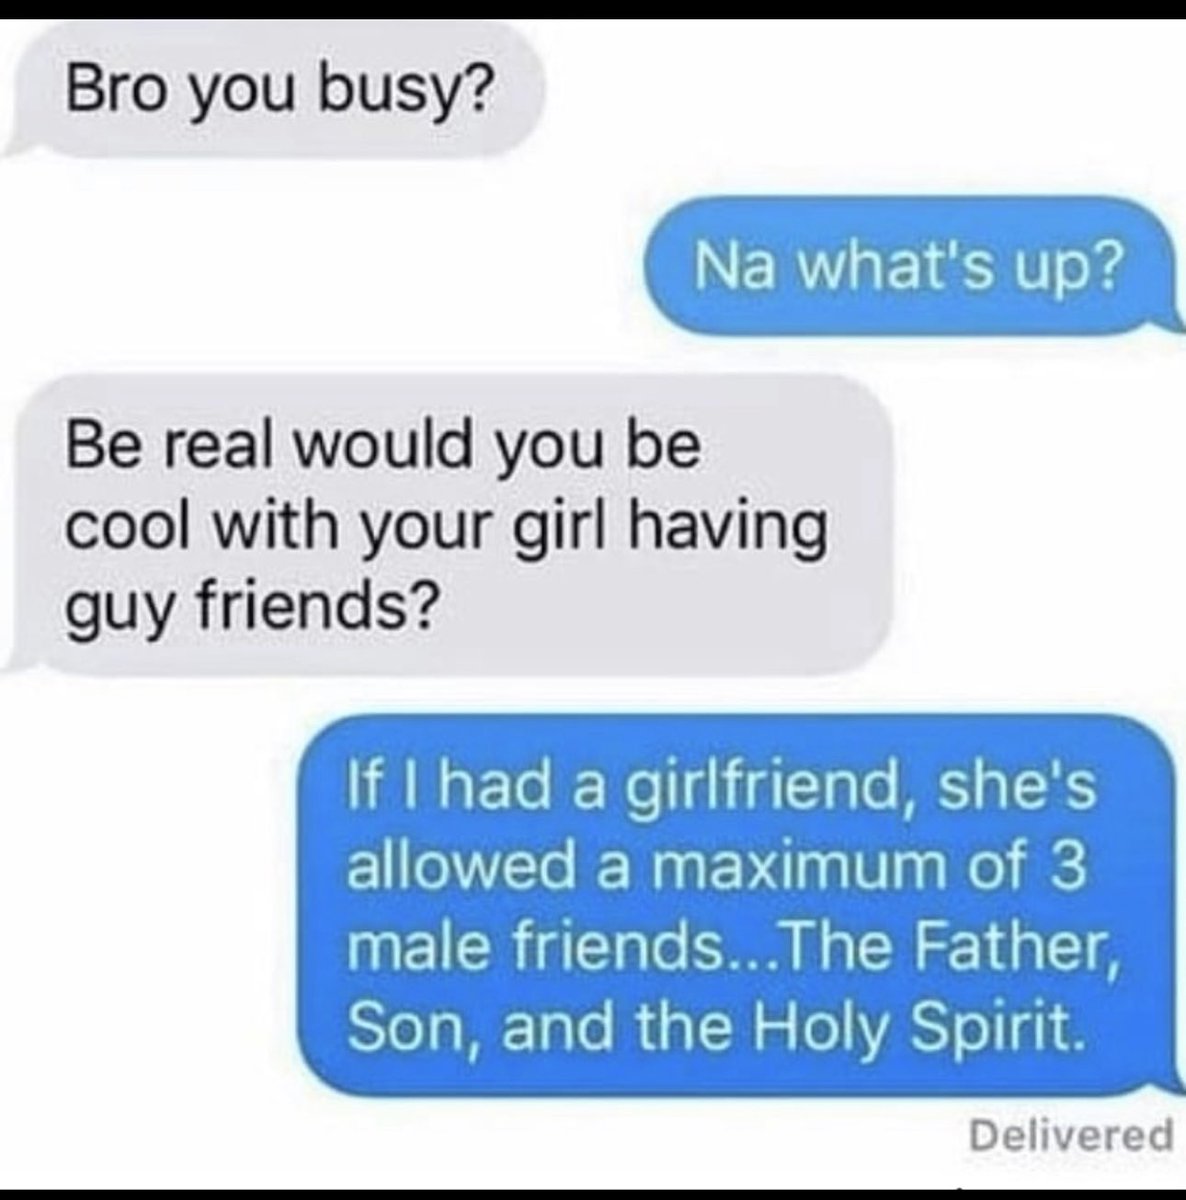 She’s not even allowed to have a brother 😂😂😂‼️